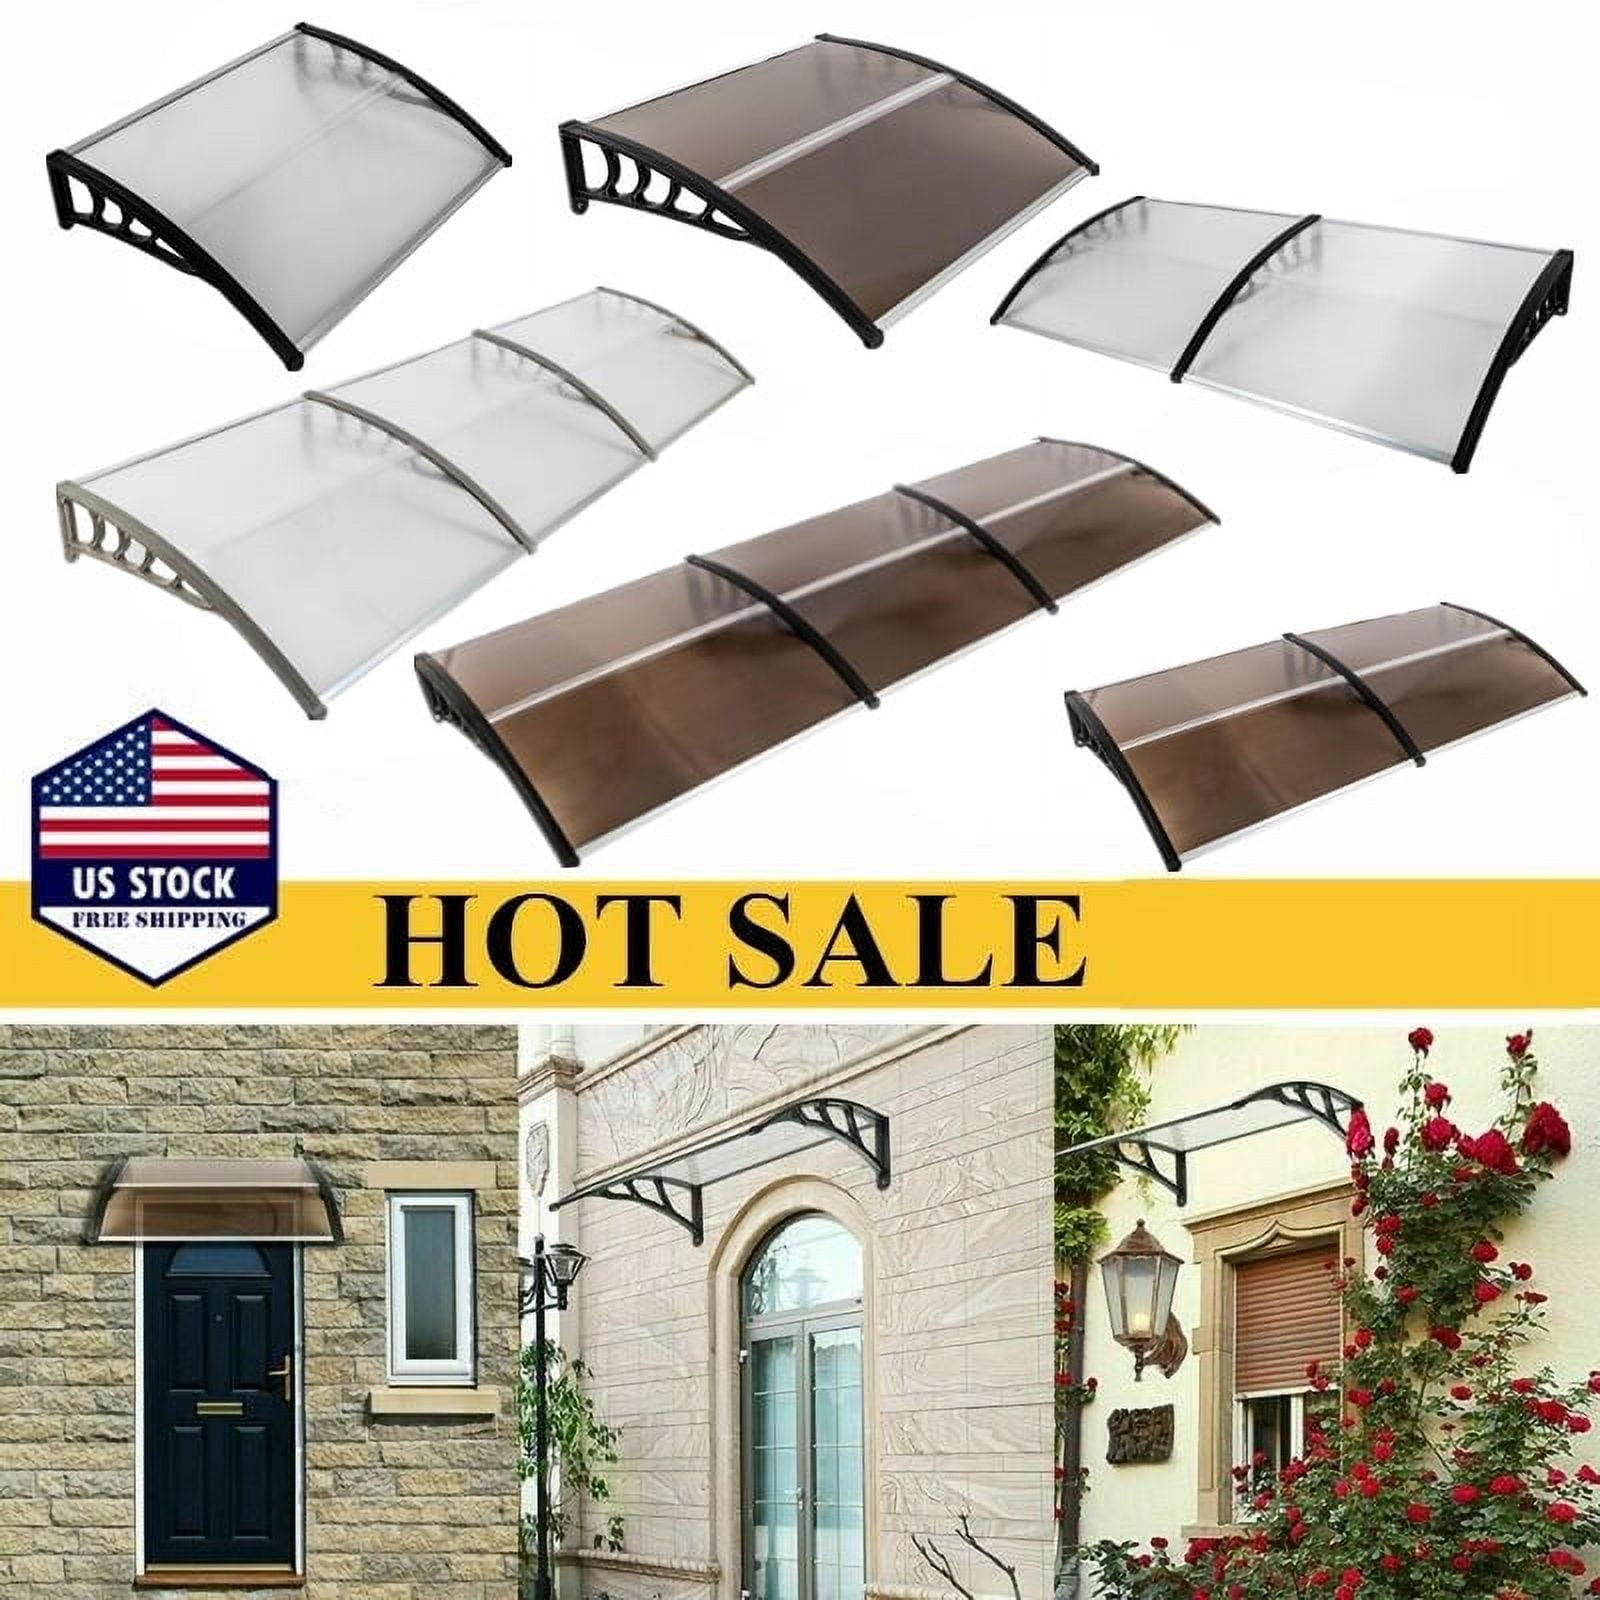 Ship From US] Goorabbit Front Door Awnings Canopies, Modern